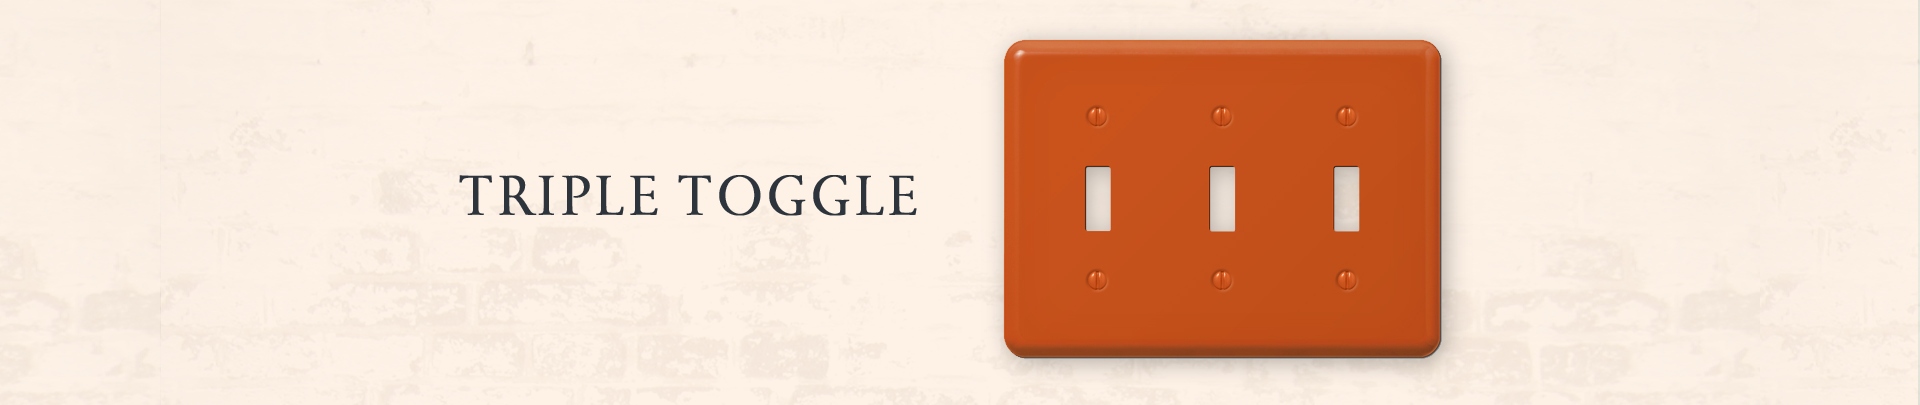 switchplates-triple-toggle.png